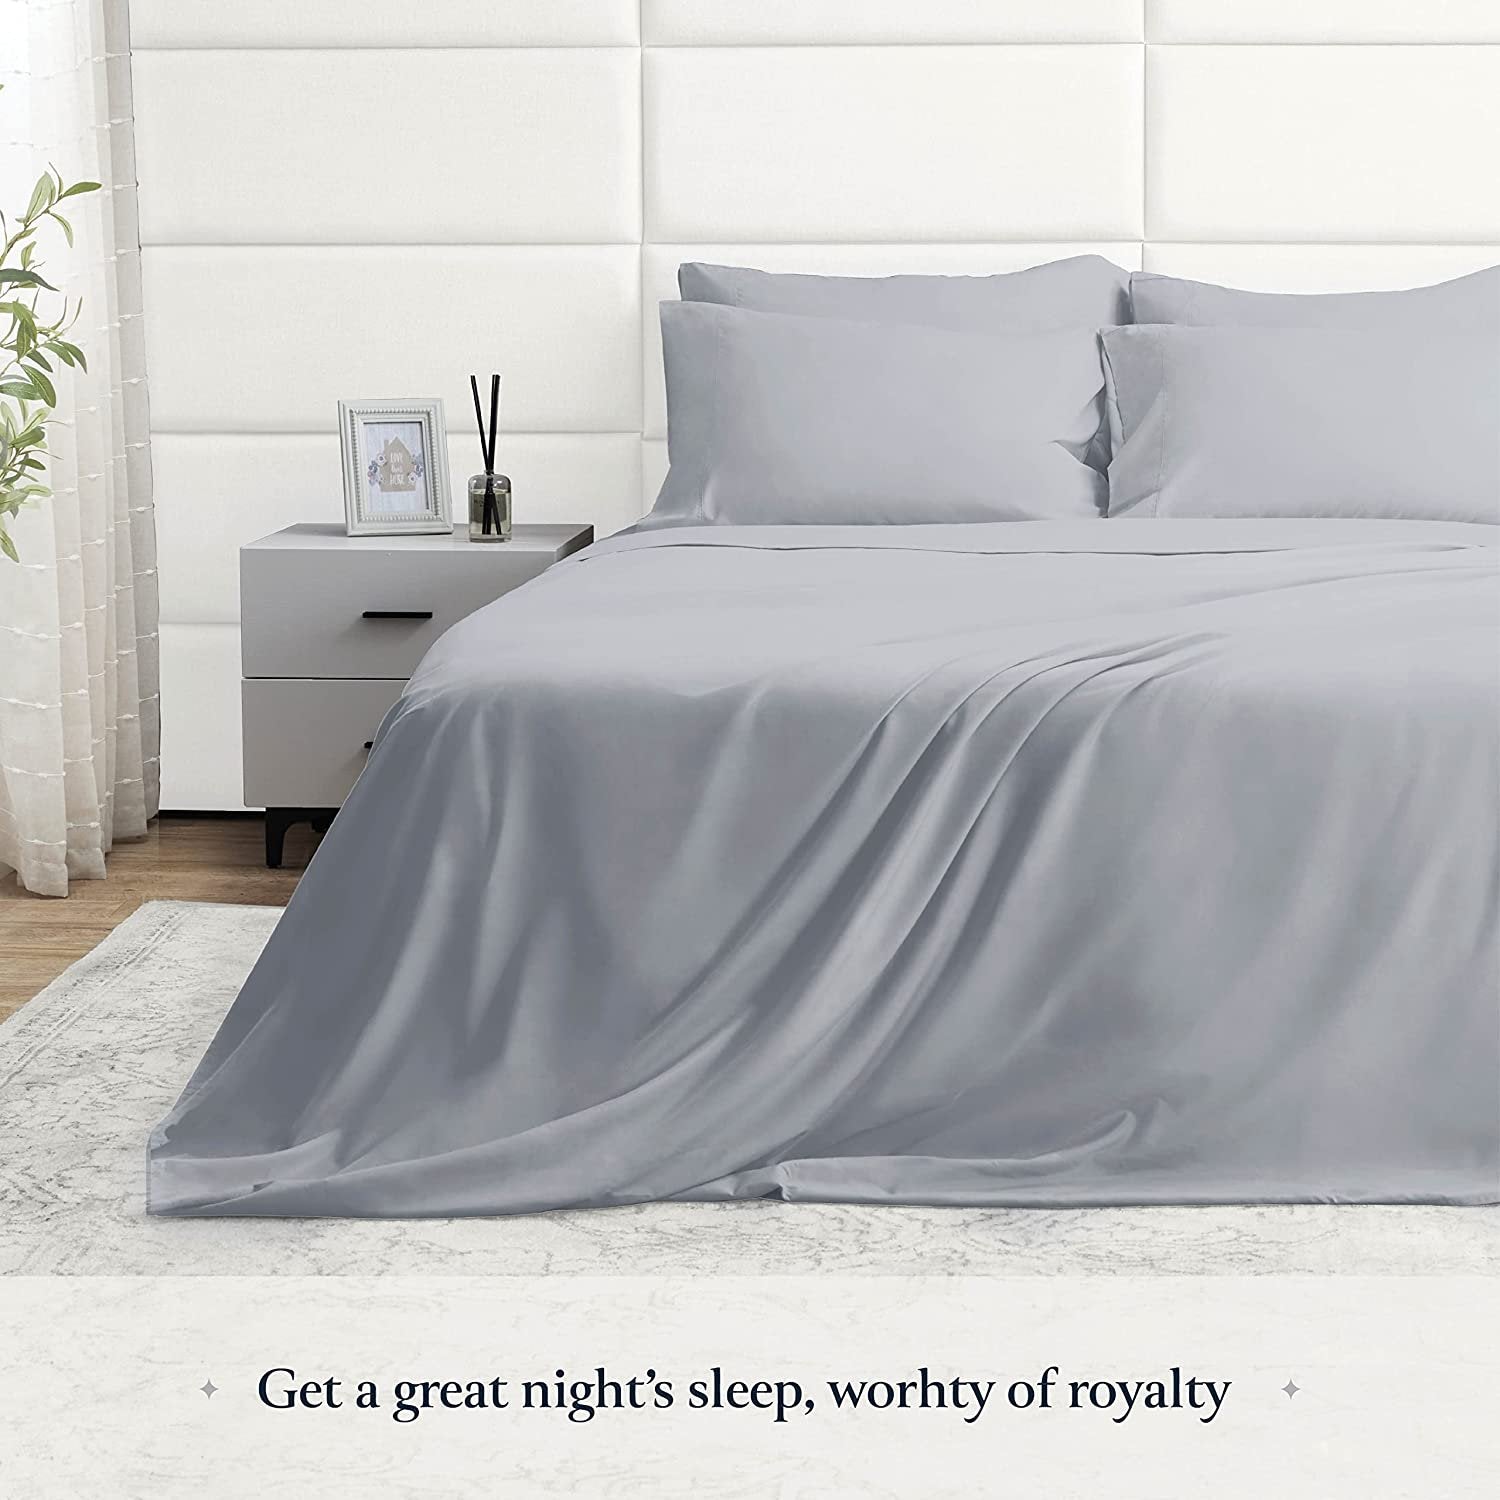 BELADOR Silky Soft King White Sheet Set -Luxury 6 Piece Bed Sheets for King Size Bed, Secure-Fit Deep Pocket Sheets with Elastic, Breathable Hotel Sheets & Pillowcase Set, Wrinkle Free Oeko-Tex Sheets